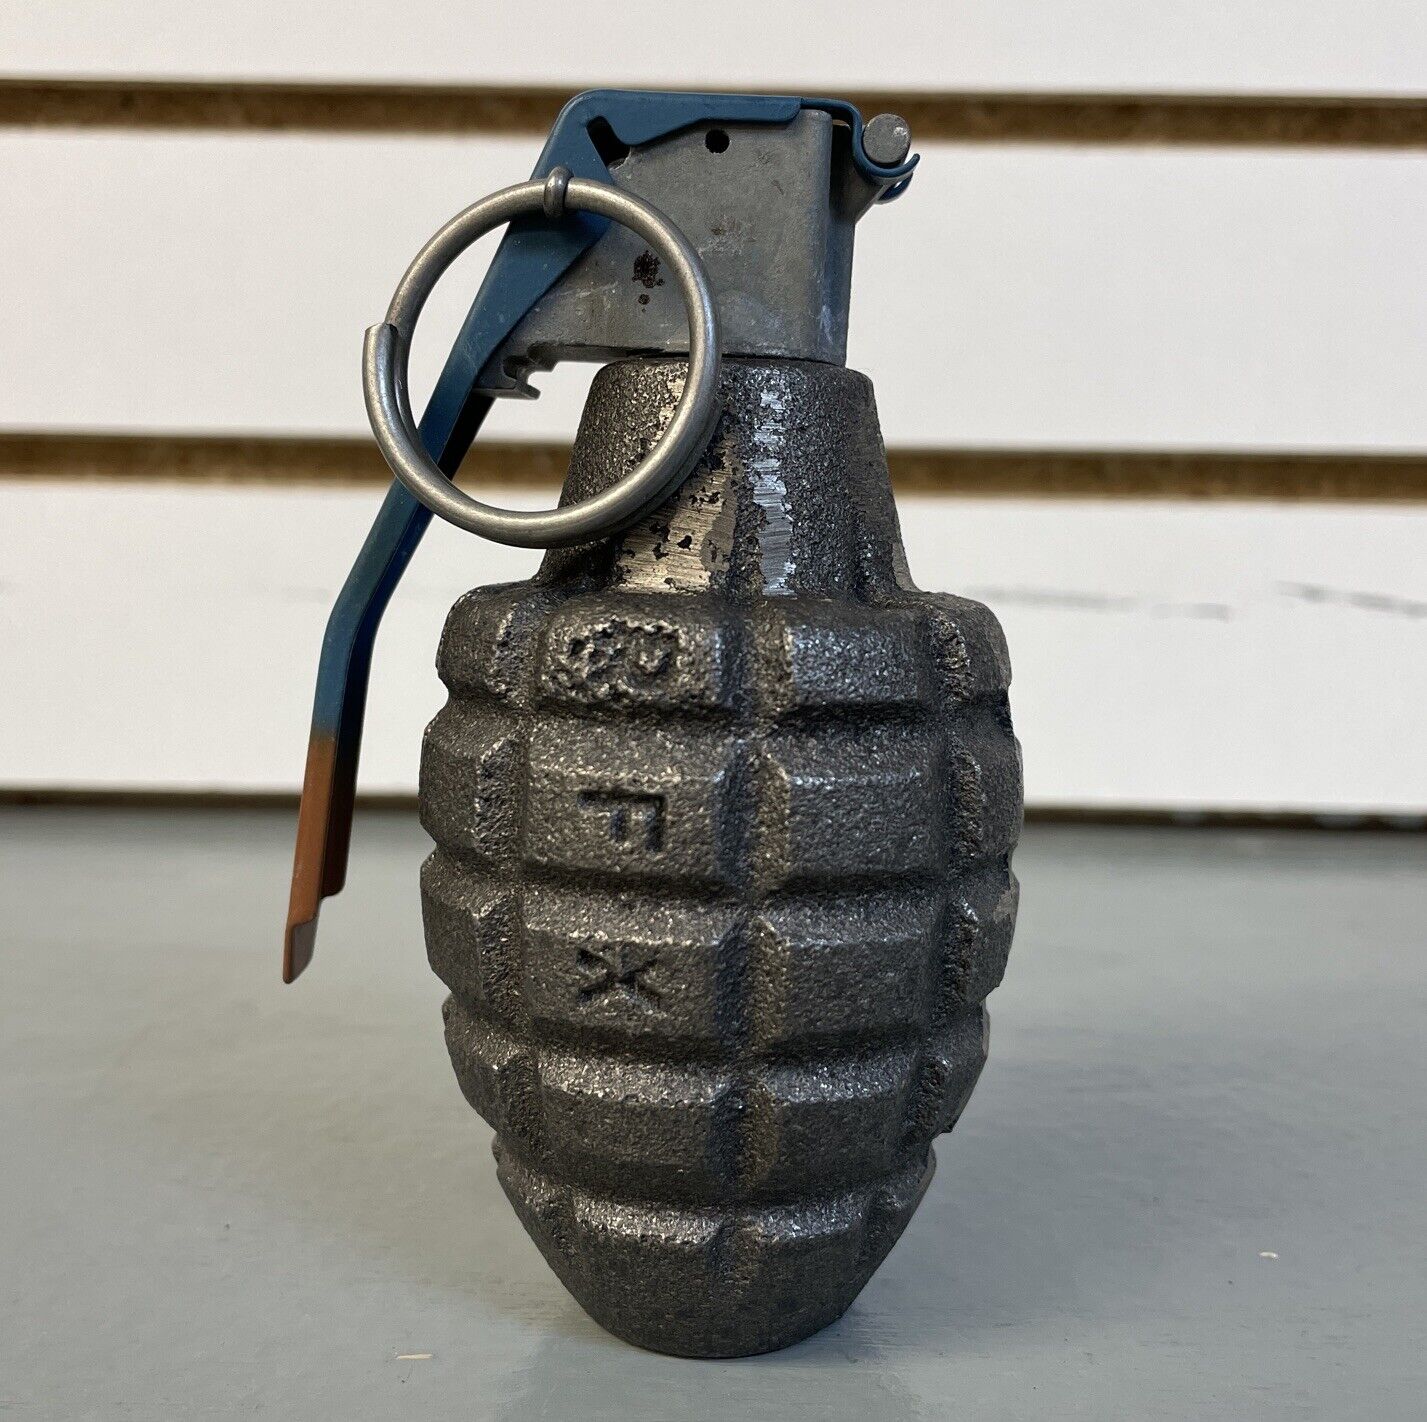 REPRODUCTION Military Army Training M21 RFX Pineapple Hand Grenade w/ M228 Pin